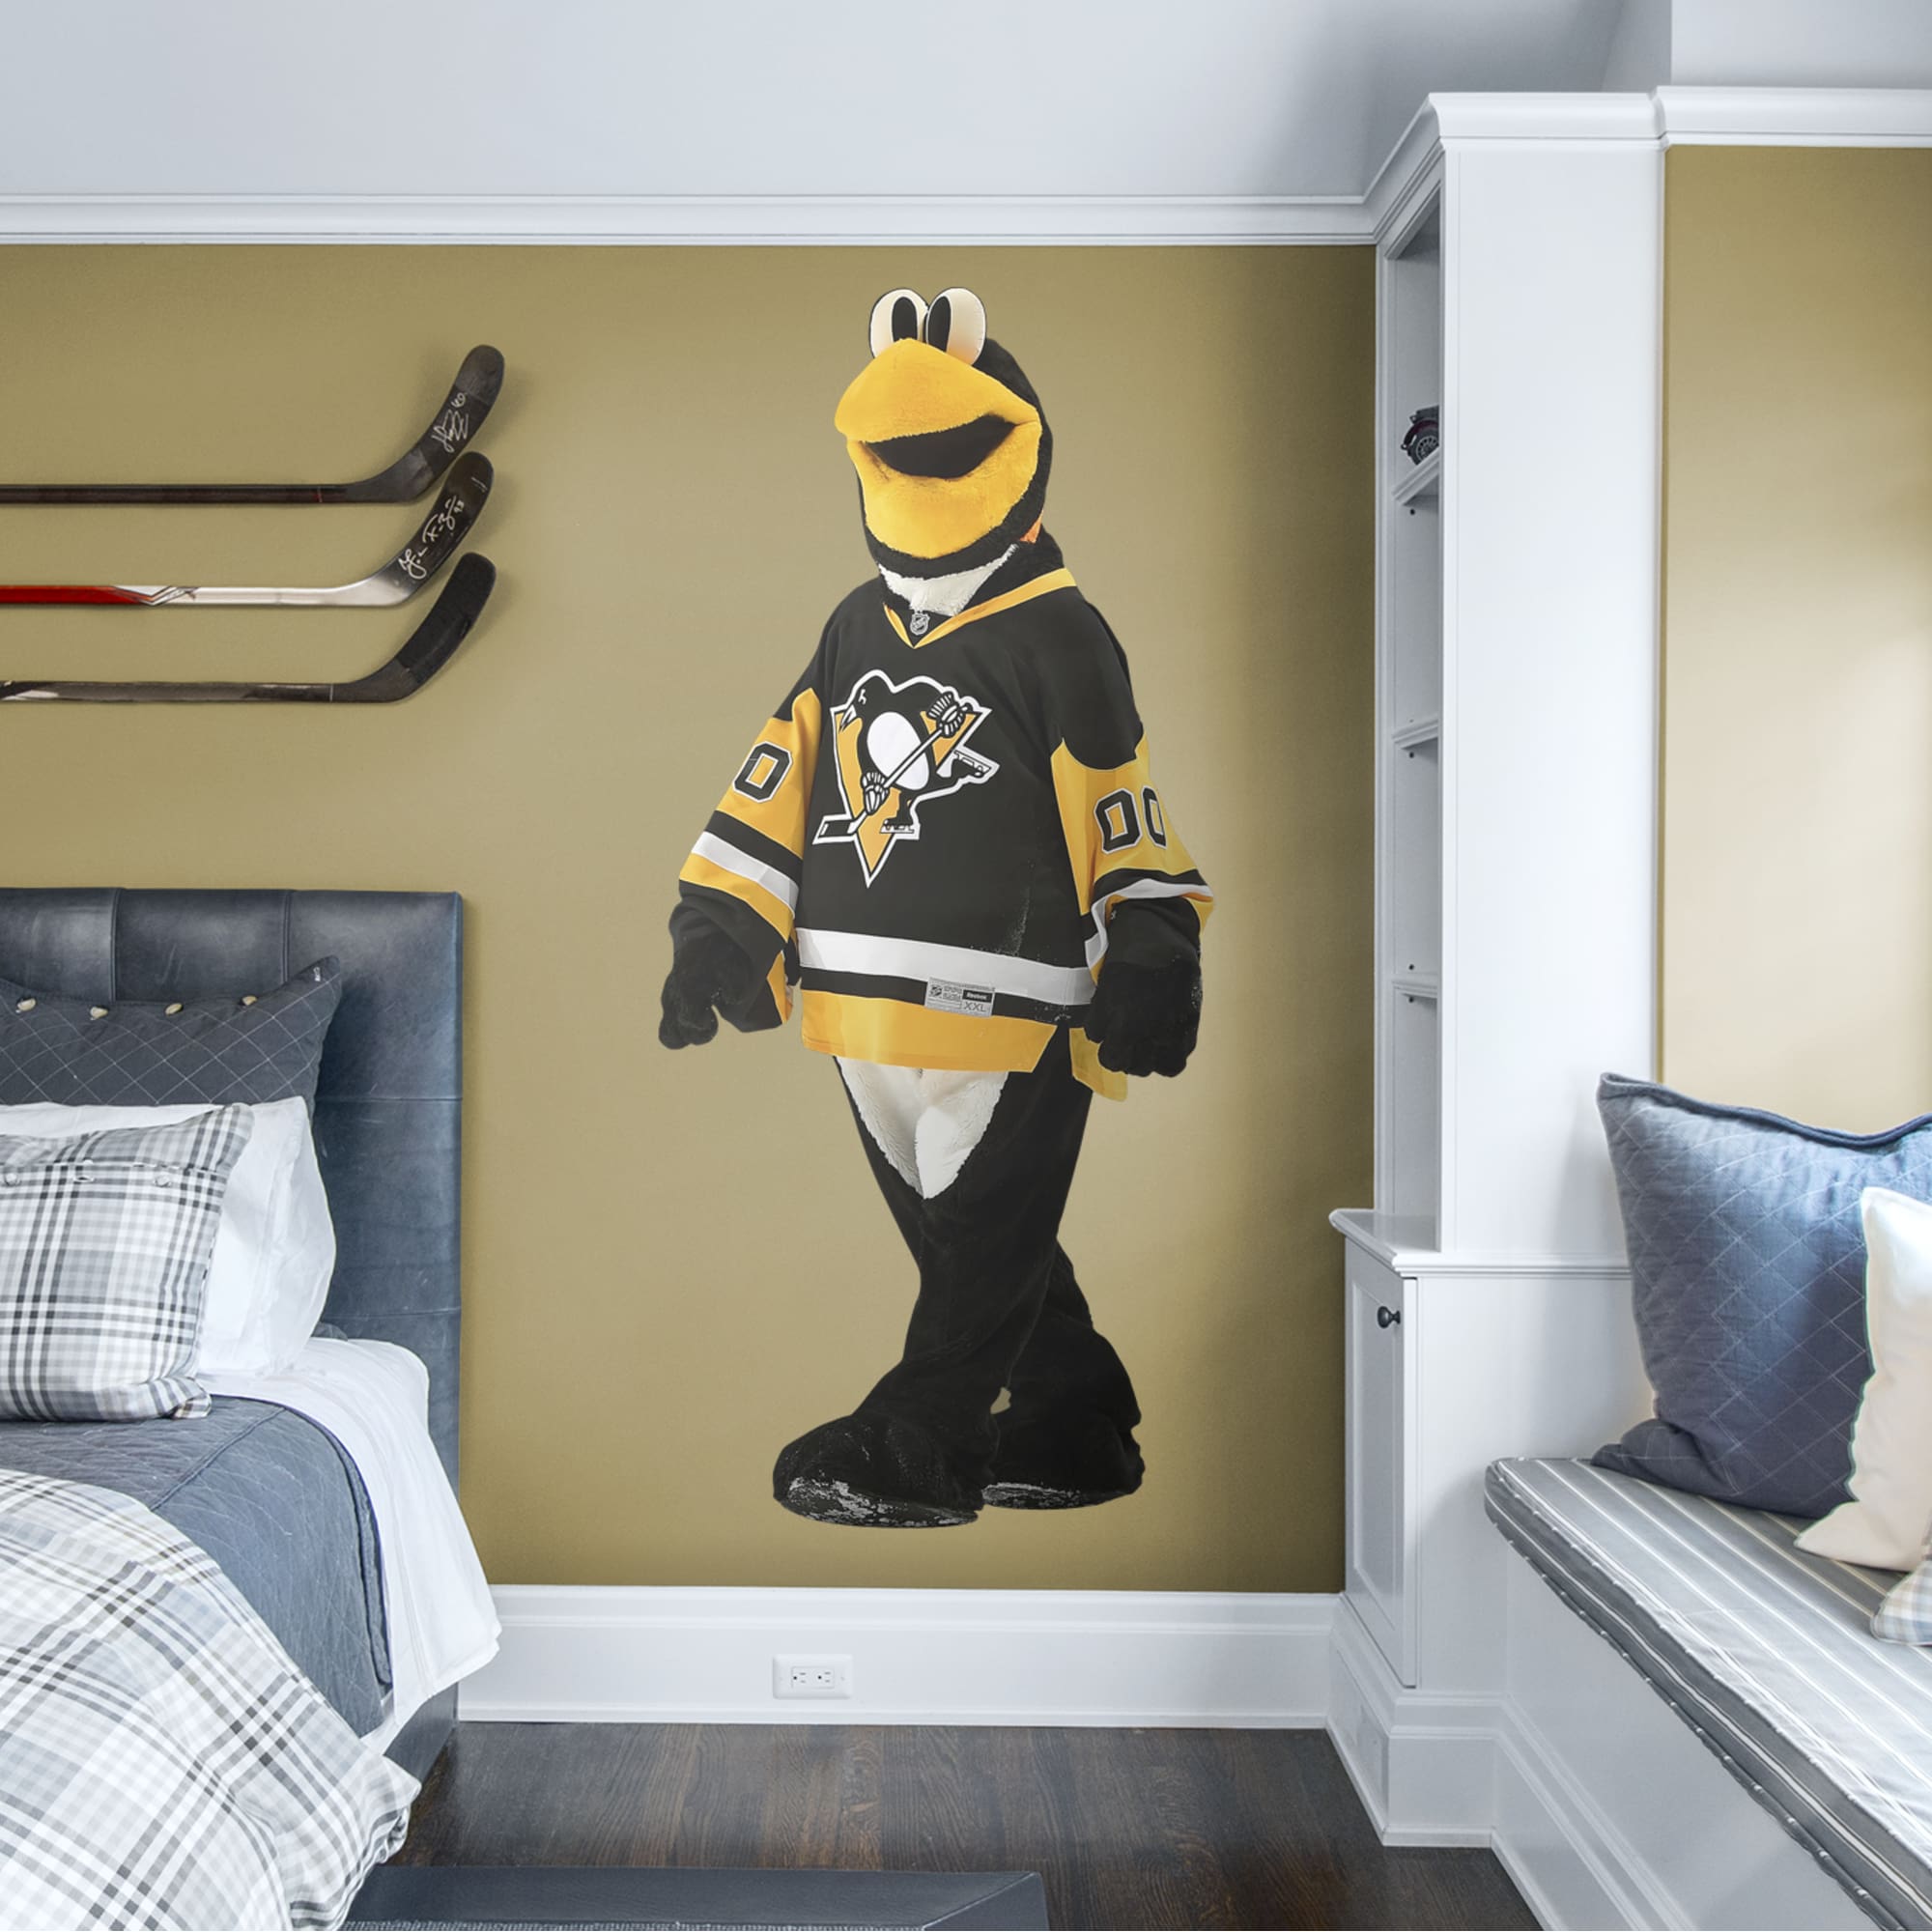 Pittsburgh Penguins: Iceburgh Mascot - Officially Licensed NHL Removable Wall Decal 35.0"W x 78.0"H by Fathead | Vinyl